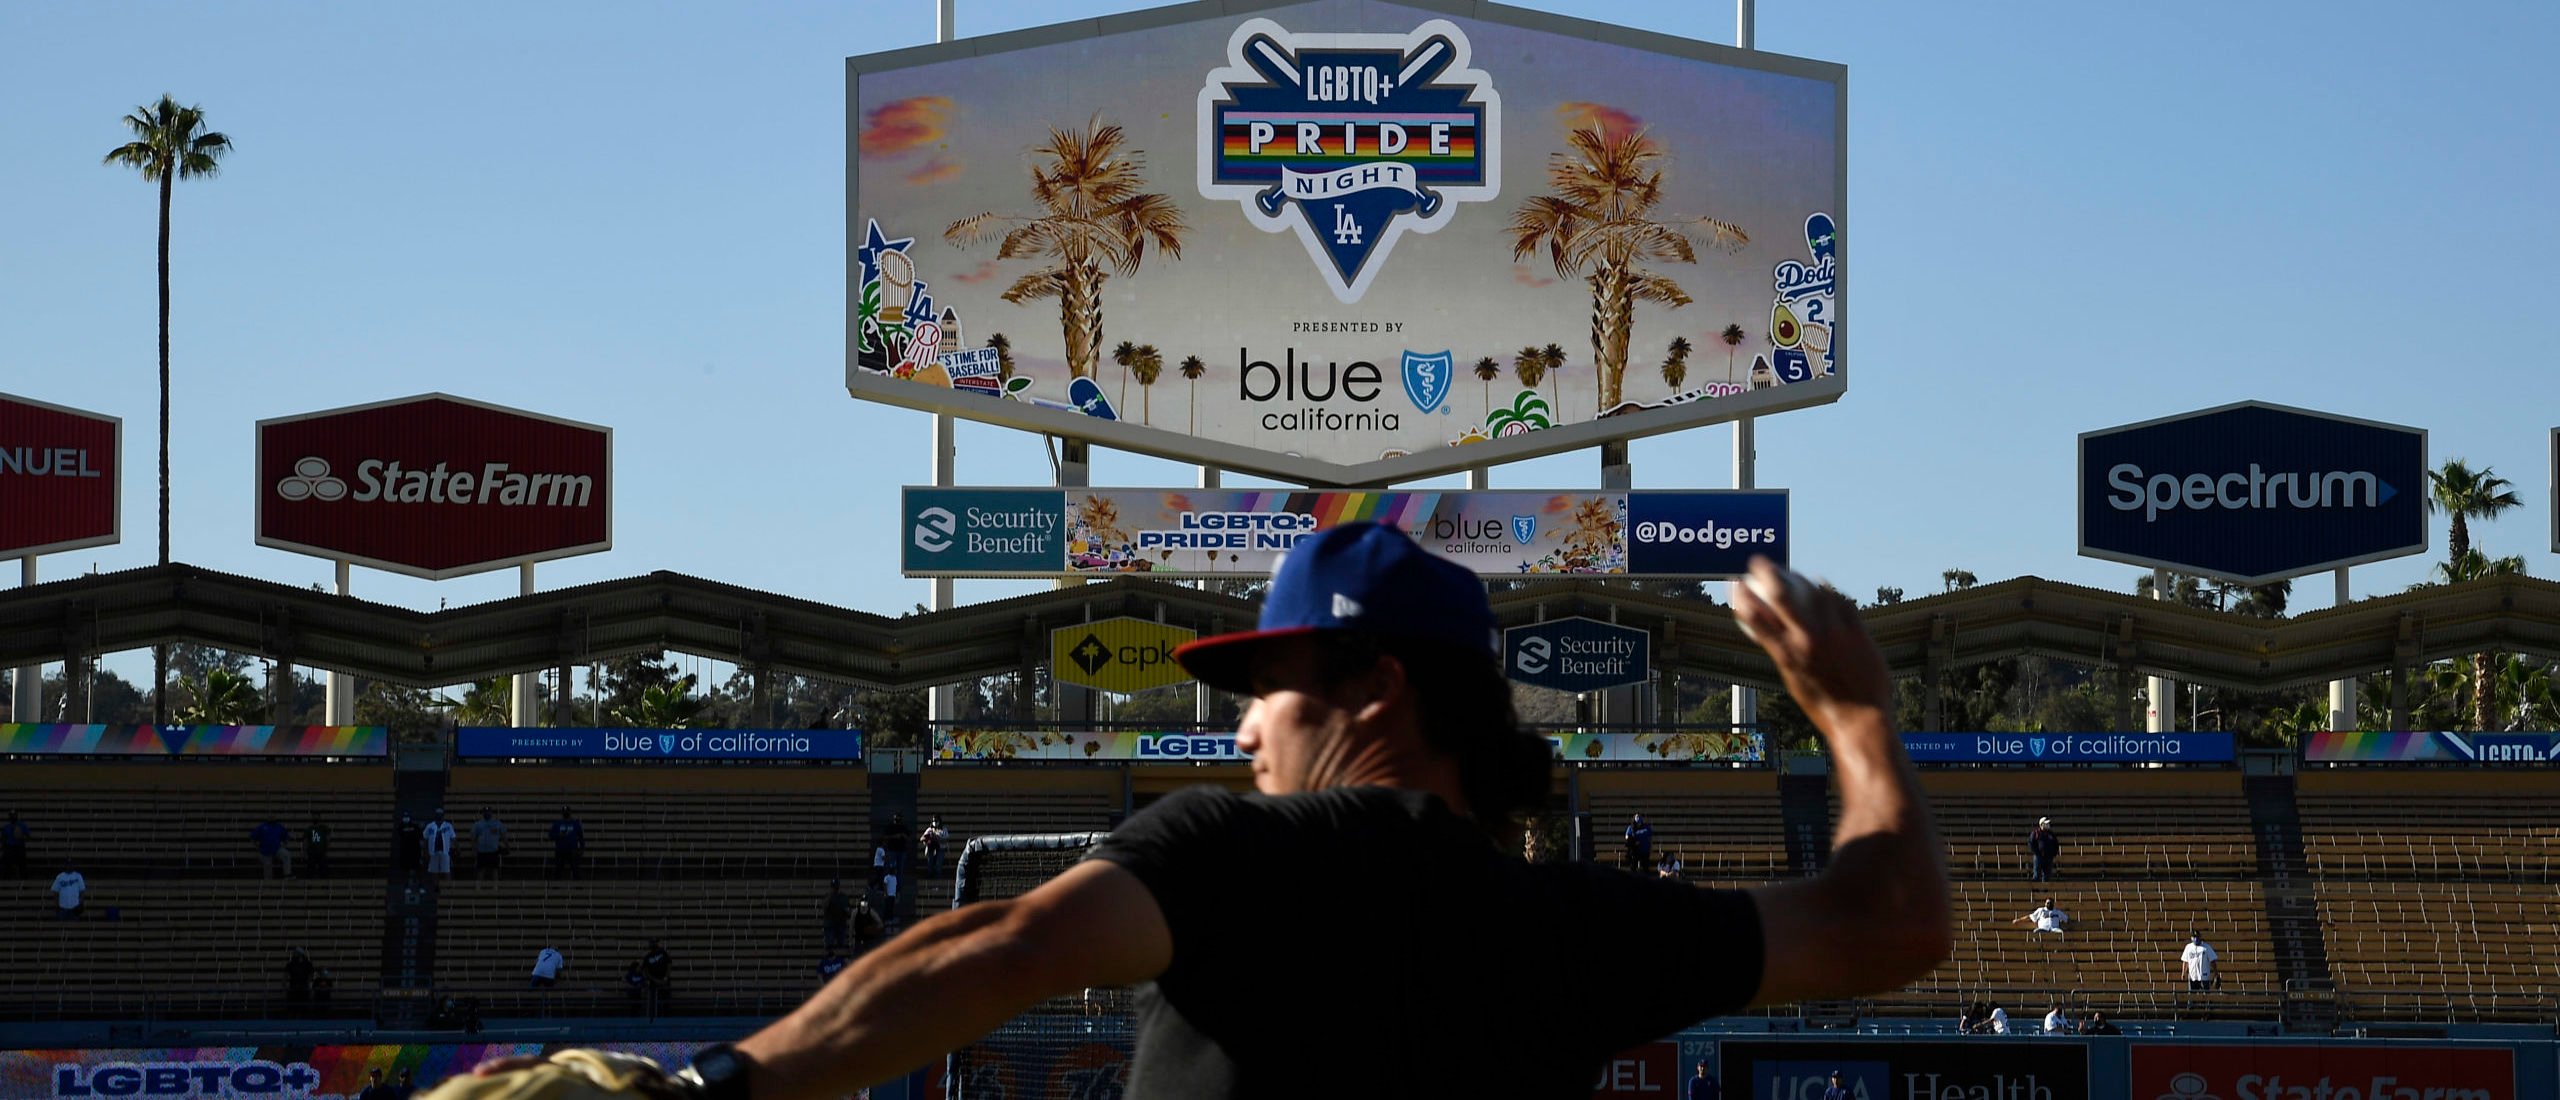 Meet the Sisters of Indulgence: L.A. Dodgers Chose Radical